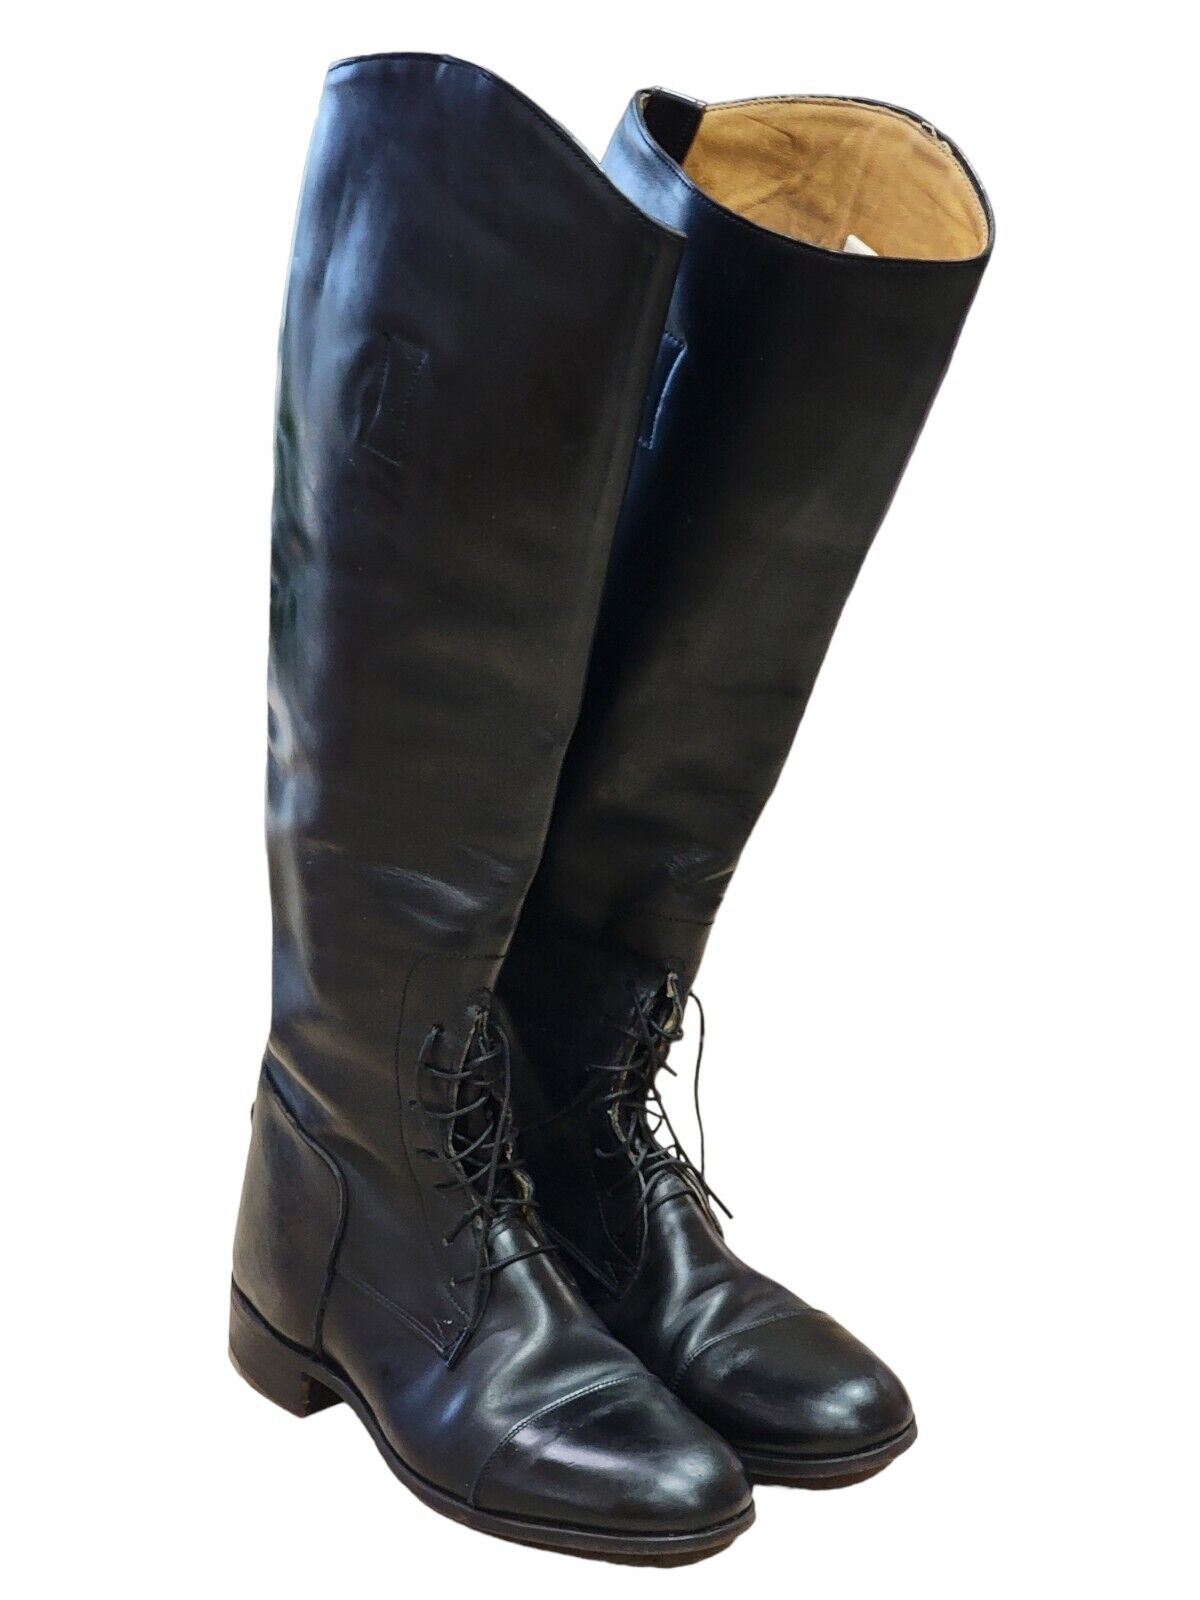 The Grand Prix Women's Service Equestrian Black Leather English Riding Boots  6